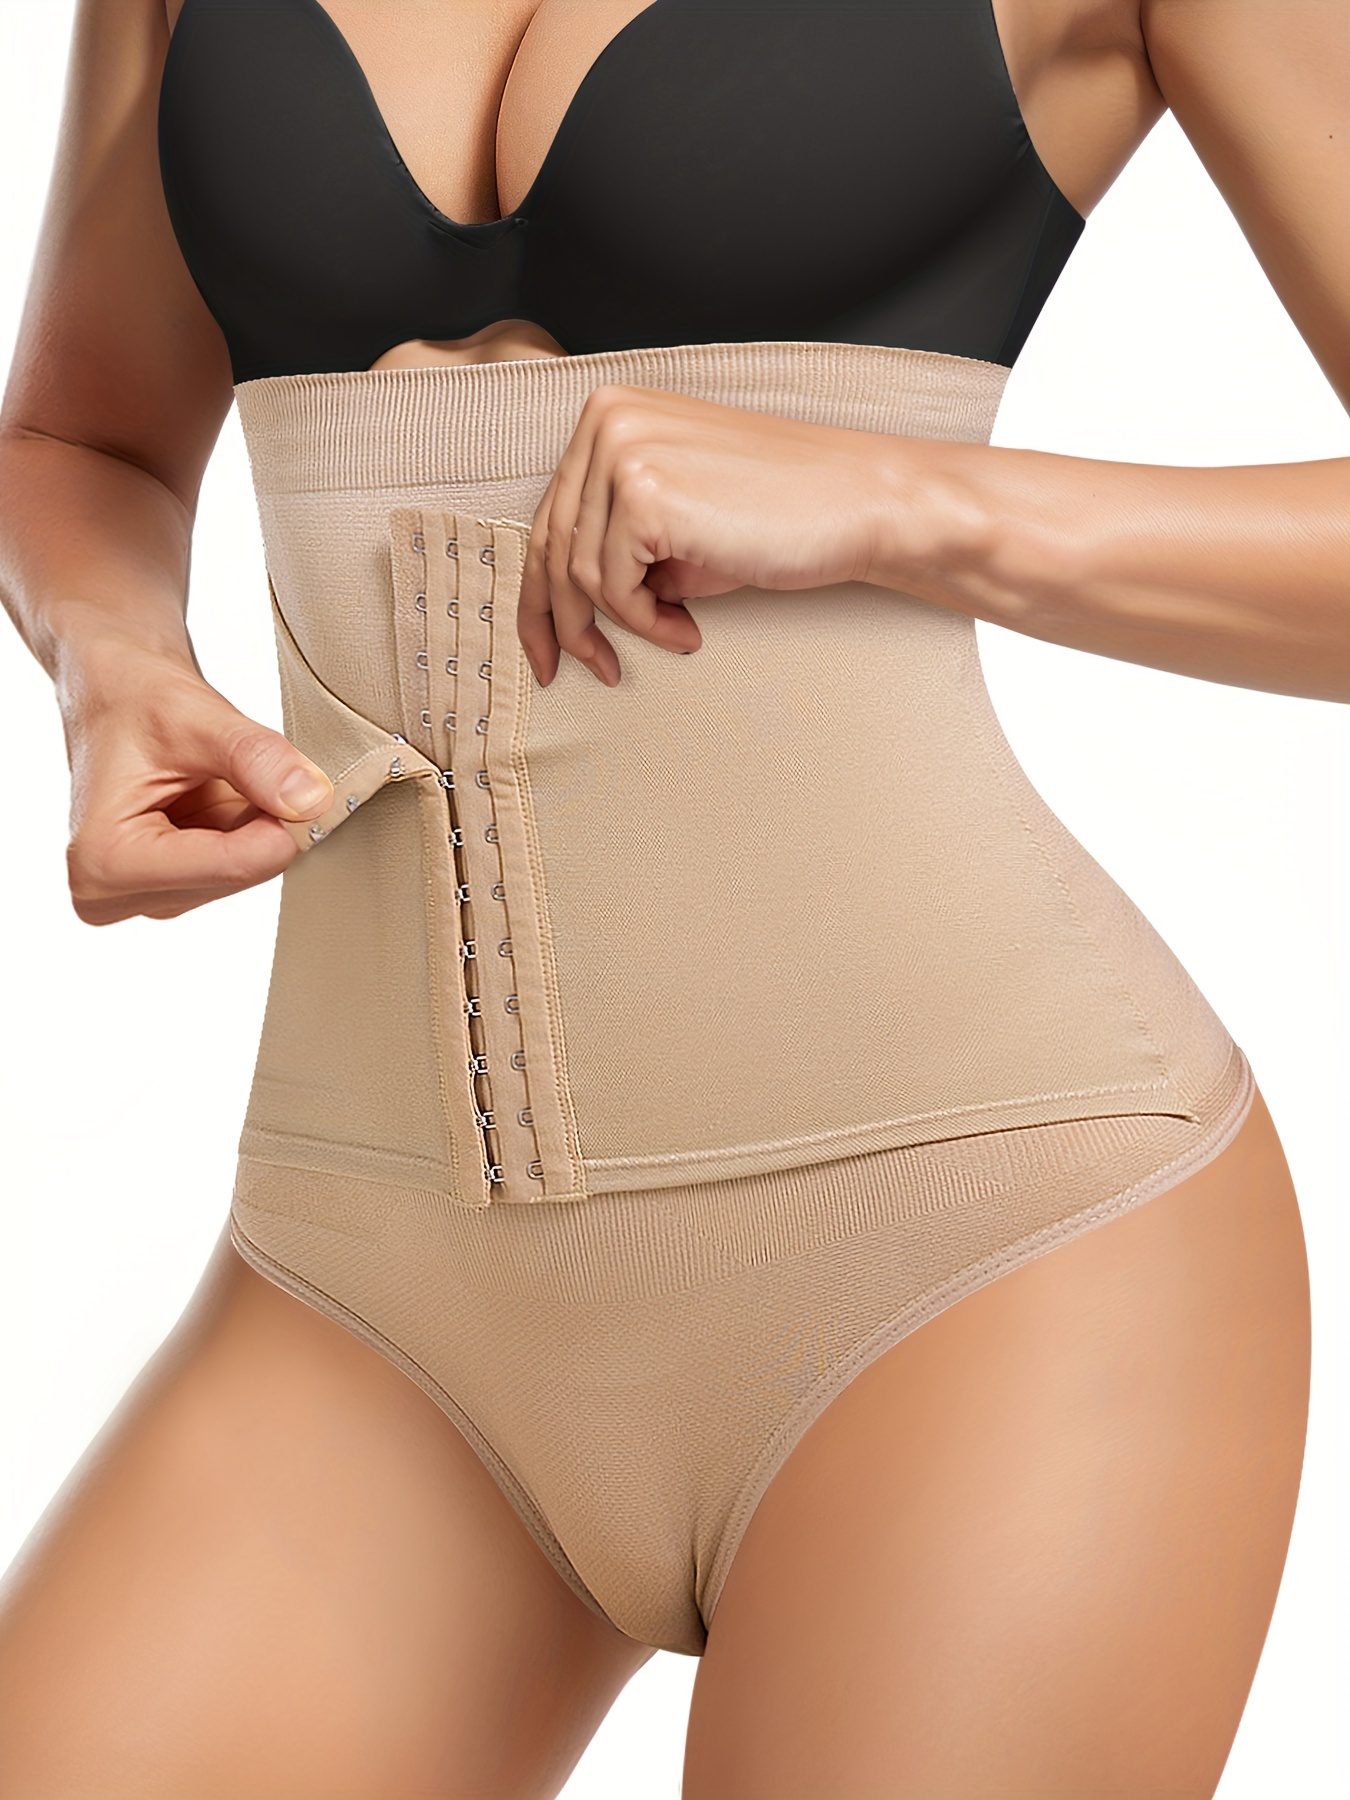 Gotoly Women Shapewear Butt Lifter Panties High-Waisted Double Tummy  Control Knickers Waist Trainer Slimming Body Shaper Thigh Slimmer Shorts